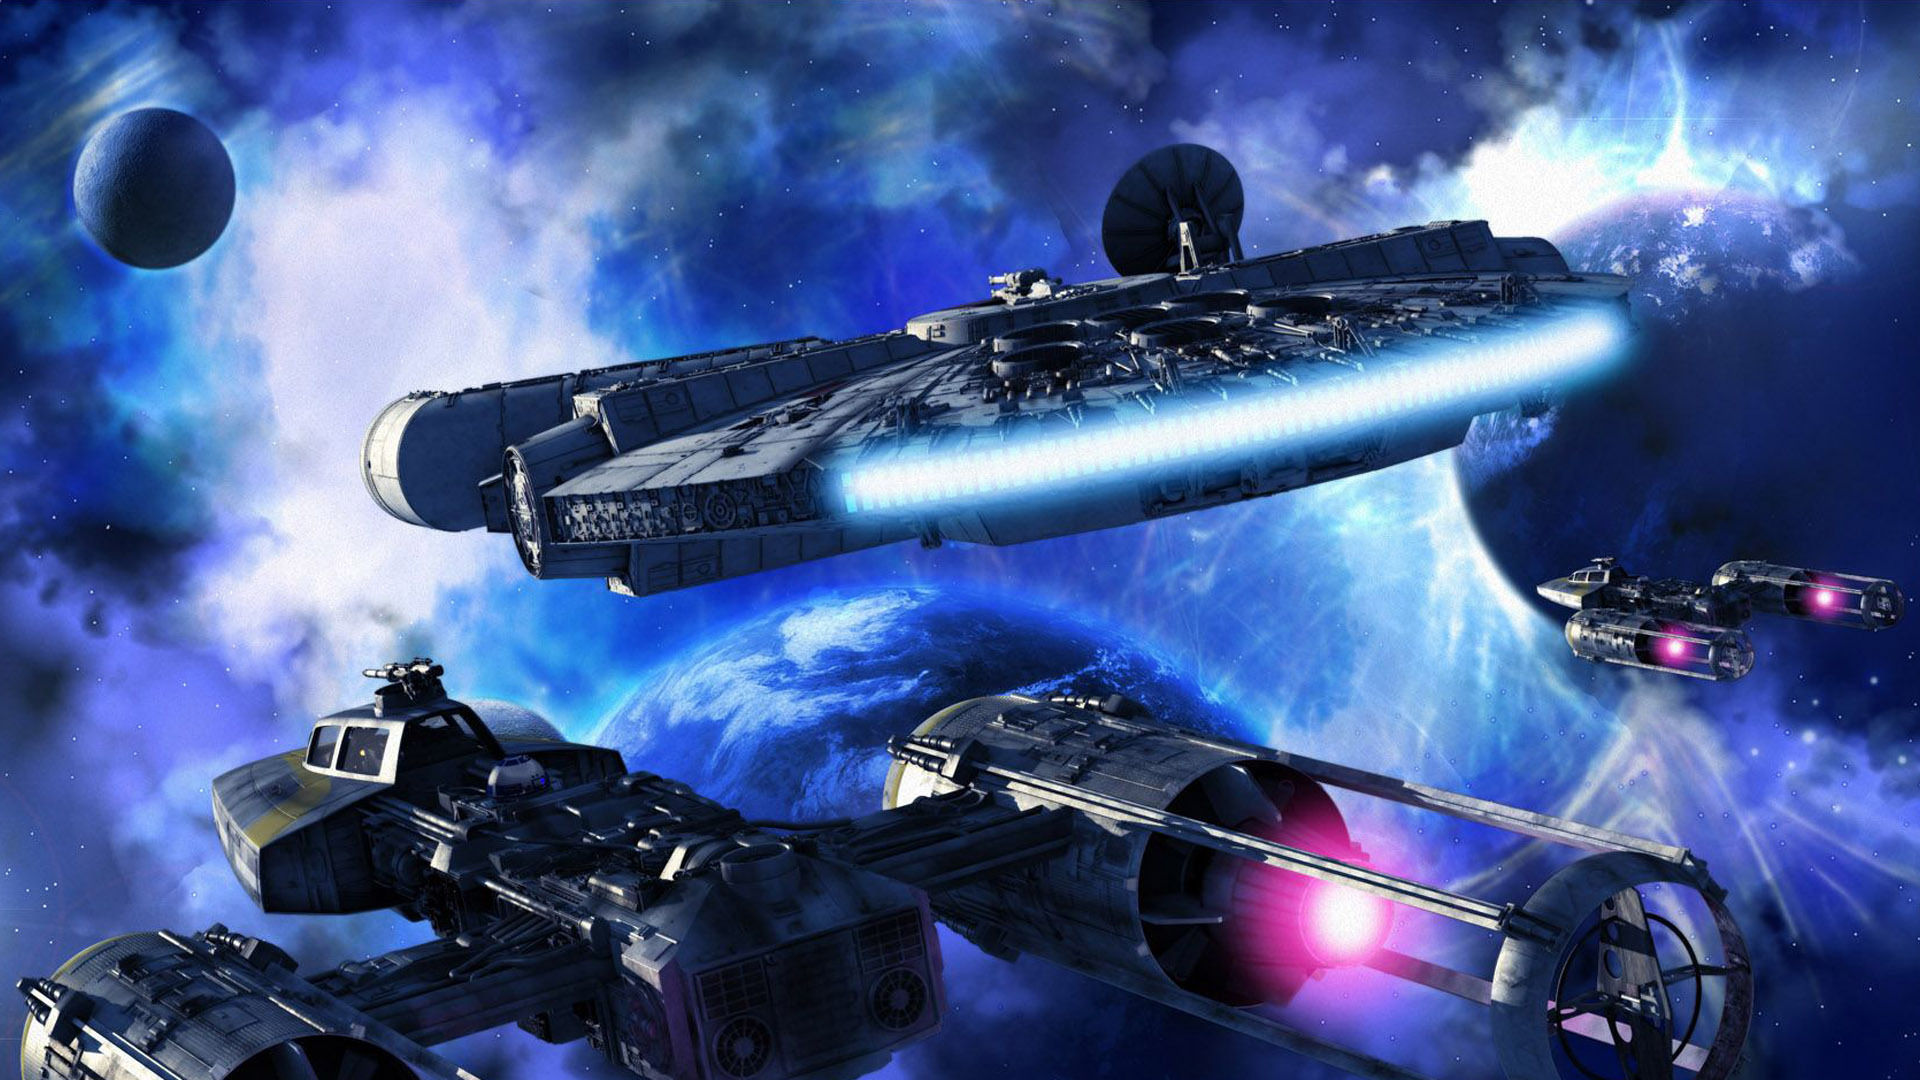 star wars ships wallpaper,spacecraft,space,outer space,space station,battlecruiser